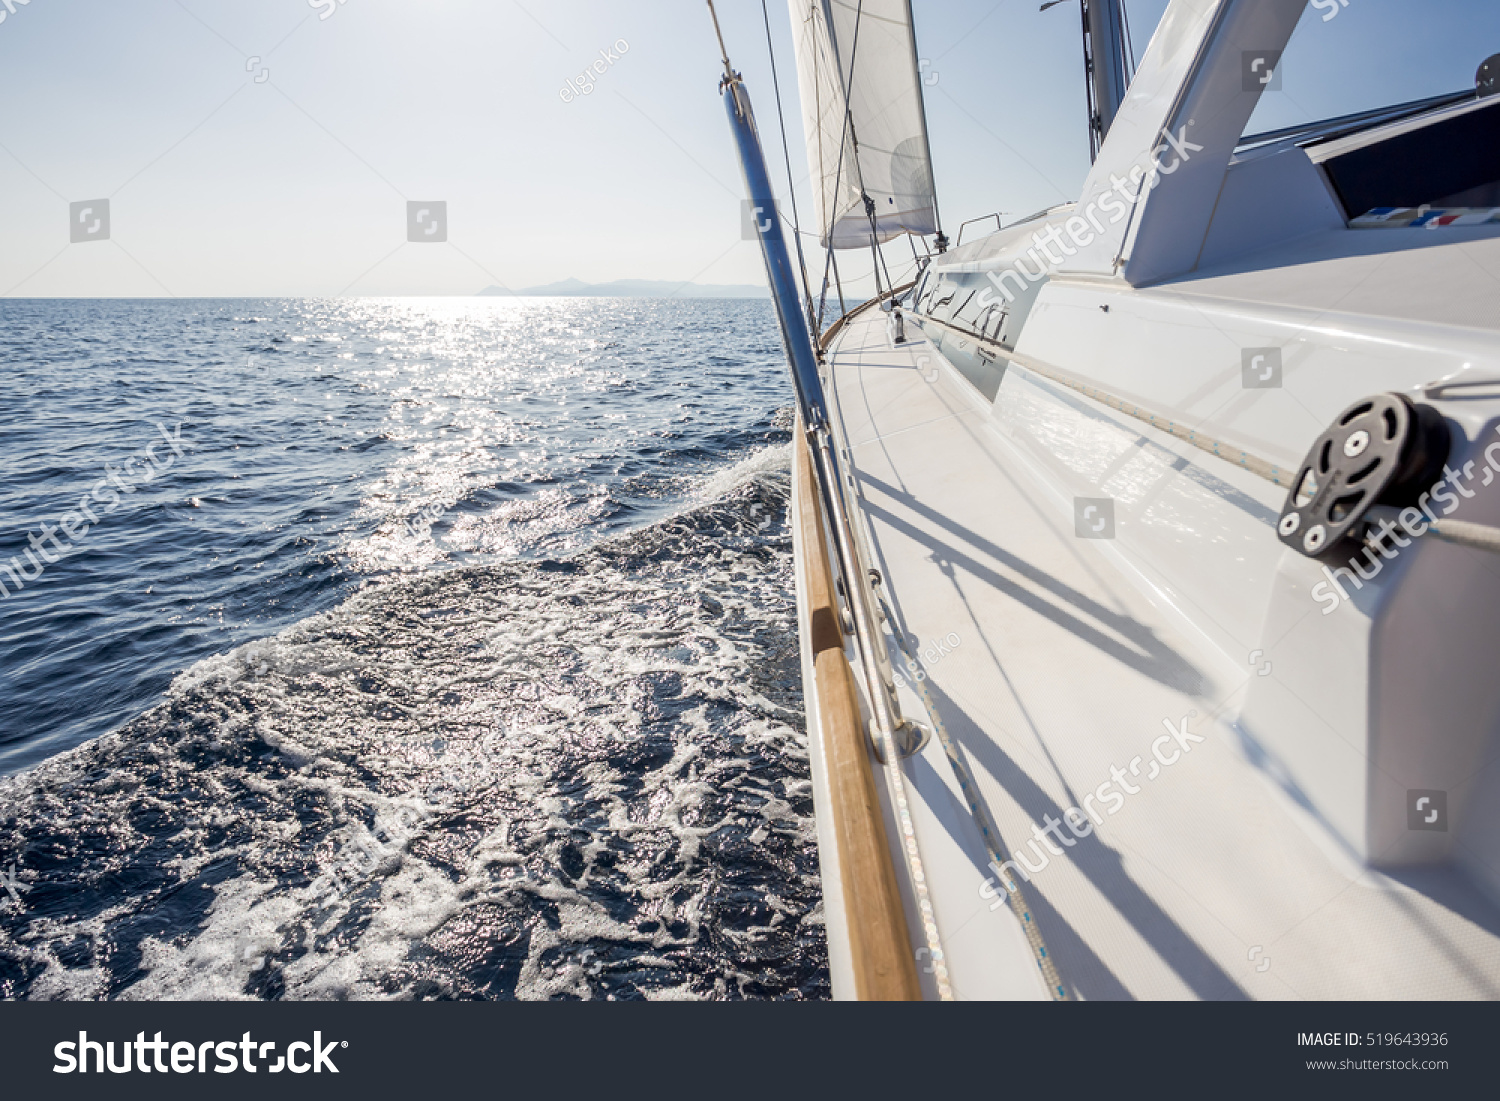 stock-photo-sail-vessel-surfing-on-the-sea-519643936